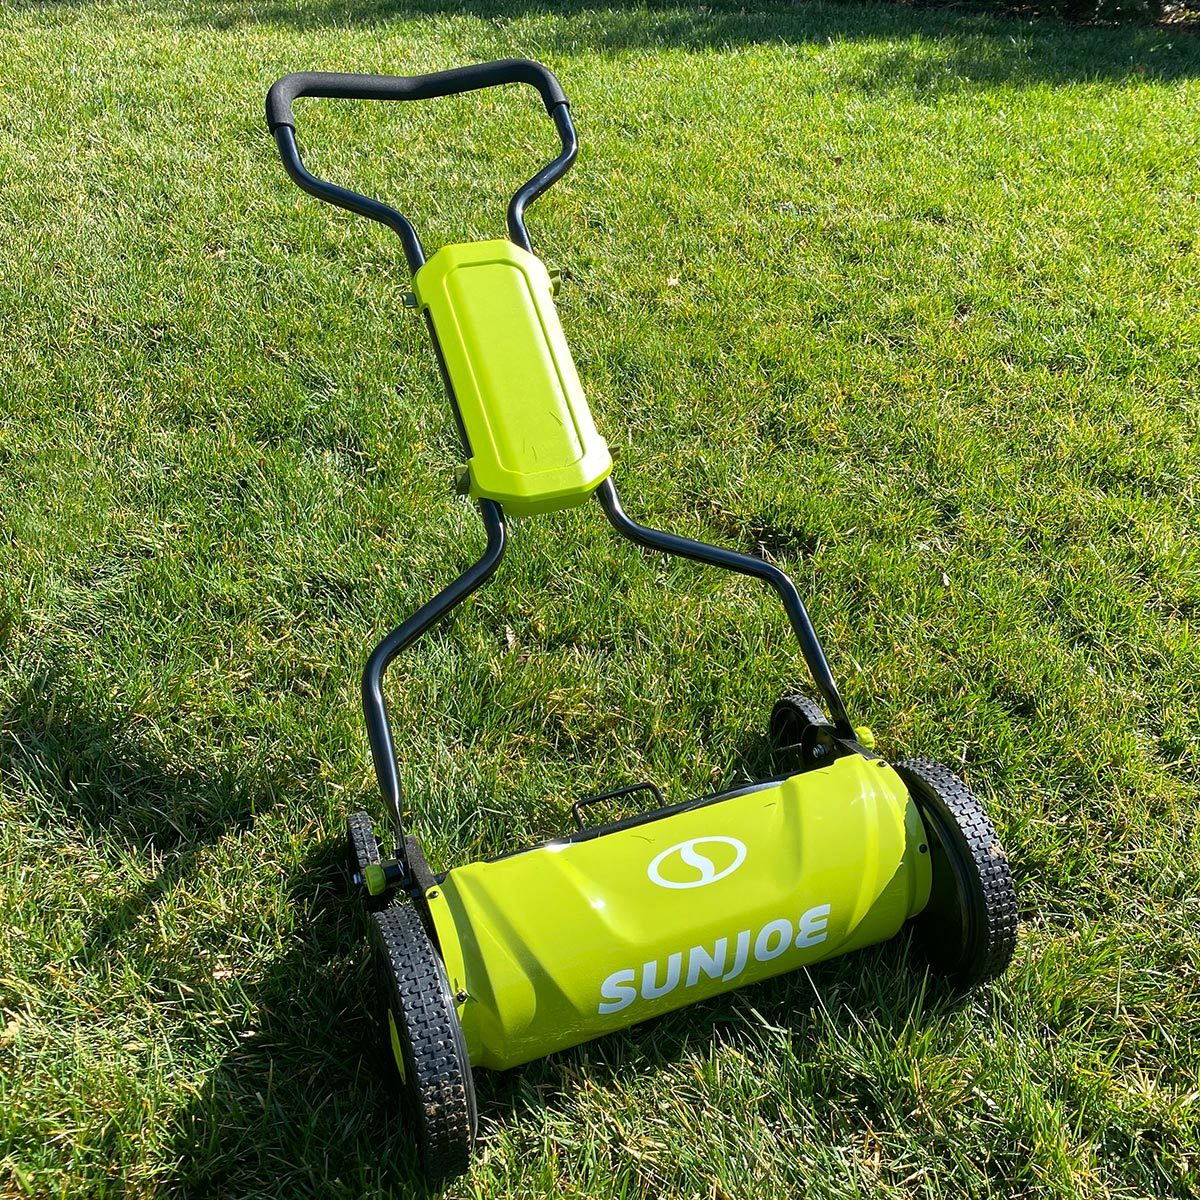 <h3>Sun Joe MJ800M Reel Mower</h3> <p>For seniors like my parents, I recommend the <a href="https://www.campingworld.com/sun-joe-mj1800m-18-inch-quad-wheel-5-position-razor-sharp-cutting-blade-silent-push-reel-mower--130756.html" rel="noopener">Sun Joe MJ800M Reel Mower</a>. This reel mower has a nice ergonomic grip with padding that makes controlling the mower super easy. The padded handle is designed to "give" a little when squeezing and pushing and overall requires less hand strength to operate.</p> <p>I also love that the Sun Joe MJ800M reel mower has four sturdy wheels that allow it to stand up straight. This means no bending over to pick the mower up. Plus, it stores similarly to a vacuum. This stops my elderly parents from leaning over to pick up a heavy mower and prevents them from trying to pick it up and store it on a hook on the wall.</p> <p><strong>Pros</strong></p> <ul> <li>Quad wheels allow it to stand up</li> <li>Comfortable hand grips</li> <li>Nice design</li> </ul> <p><strong>Cons</strong></p> <ul> <li>Heavier</li> <li>Plastic wheels</li> </ul> <p class="listicle-page__cta-button-shop"><a class="shop-btn" href="https://www.campingworld.com/sun-joe-mj1800m-18-inch-quad-wheel-5-position-razor-sharp-cutting-blade-silent-push-reel-mower--130756.html">Shop on Camping World</a></p> <p class="listicle-page__cta-button-shop"><a class="shop-btn" href="https://www.cabelas.com/shop/en/sun-joe-18-quad-wheel-5-position-silent-push-reel-mower">Shop on Cabela's</a></p> <p class="listicle-page__cta-button-shop"><a class="shop-btn" href="https://www.basspro.com/shop/en/sun-joe-18-quad-wheel-5-position-silent-push-reel-mower">Shop on Bass Pro Shops</a></p>  <h2 class="">What to Look for When Buying a Reel Mower</h2> <p>A traditional rotary <a href="https://www.familyhandyman.com/article/lawn-mower-buying-guide/">lawn mower</a> uses a flat, spinning blade that <a href="https://www.familyhandyman.com/article/lawn-cutting-dos-and-donts/">cuts grass</a> the way a machete chops tall grass in a field. By contrast, a reel mower (sometimes called a cylinder mower) functions more like a pair of scissors. Blades of grass are caught and cut between the spinning reel (the curved metal that resembles a strand of DNA) and a fixed horizontal blade called the cutting bar. The resulting clean, precise snip makes for healthier, more attractive lawns. That's why reel mowers are frequently the machines of choice for golf courses.</p> <p>Reel mowers have a reputation for being "old school" and quite frankly, it is well deserved. But reel mowers have a ton of qualities besides nostalgia that give them relevance in the highly technological age we live in today. Reel mowers don't require any external power source, are inexpensive and require very little maintenance.</p> <p>"The advantages of a reel lawn mower include a superior quality of cut and the ability to mow at very low heights, such as golf course putting greens," says Bob Mann, Senior Director of Technical & Regulatory Affairs at the <a href="https://www.landscapeprofessionals.org/" rel="noopener">National Association of Landscape Professionals</a>. "The chief disadvantage is that they are very difficult to maintain, requiring daily adjustments in order to cut correctly and require highly specialized and very expensive sharpening equipment making their use cost prohibitive."</p> <p>Here are some things you should look for when making a reel mower purchase:</p> <ul> <li><strong>Cutting width: </strong>When it comes to how much time you spend mowing your grass, cutting width is a huge part of the equation. Wider is better to reduce cutting time and make fewer passes. With reel mowers, cutting width also means more resistance and a more difficult push.</li> <li><strong>Cutting height: </strong>Reel mowers are great for warm-season grasses that require more frequent cutting to keep them short. Look for a reel mower with a nice cutting height range, down to about an inch or so of height.</li> <li><strong>Weight: </strong>Weight is truly a double-edged sword with reel lawn mowers. It makes the mowing experience heavier when you have more weight but also helps the mower make it over bumps in the grass. I prefer mowers with a bit of weight.</li> <li><strong>Usability: </strong>Having a comfortable, easy-to-push reel mower is an absolute must. Once you get started using a reel mower, it can be a super pleasant and satisfying experience if the mower has the right features.</li> </ul> <h2>Why You Should Trust Us</h2> <p>My partner and I have tested over 100 lawn mowers at <a href="https://www.thelawnreview.com" rel="noopener noreferrer">The Lawn Review</a>. From <a href="https://www.familyhandyman.com/article/toro-timecutter-ss4225-lawn-mower-review/" rel="noopener noreferrer">zero-turn mowers</a> to <a href="https://www.familyhandyman.com/list/best-robot-lawn-mowers/" rel="noopener noreferrer">robot mowers</a> and everything in between, we have tested just about every mower on the market. We've reviewed battery-powered mowers by walking them around in my neighborhood until they've died (which was miles). I've also done side-by-side comparisons of robot mowers in my yard to see which ones provide the best cut and can handle difficult terrain. Furthermore, I've mowed hundreds of lawns as a former owner of a landscaping company. Needless to say, I know a thing or two about mowers.</p> <h2>Dozens of Miles Walked While Testing Reel Mowers</h2> <p>I picked these reel mowers for testing for a few reasons. For starters, many of these are from really high-quality brands like Fiskars. Fiskars have made super strong lawn and <a href="https://www.familyhandyman.com/list/must-have-gardening-tools/">garden tools</a> for generations. Other brands are extremely popular, like Sun Joe and Earthwise, and sell an absurd amount of inexpensive, quality products on Amazon.</p> <p>These reel mowers are all generally the same size and have many of the same features, making a side-by-side comparison and ranking system relatively easy. Each mower has a handful of distinct features that make it suited for a specific yard type, personality type or grass type.</p> <h2>FAQ</h2> <h3>Do you sharpen reel mower blades?</h3> <p>Yes, reel mower blades generally need to be sharpened every year.</p> <h3>Are reel mowers hard to push?</h3> <p>Reel mowers are not hard to push if the grass is maintained at an appropriate height. They are a good workout and present some opposing force, but they are not difficult to operate.</p> <h3>How long of grass can a reel mower cut?</h3> <p>Reel mowers can cut grass up to 4 inches tall. To cut taller grasses, the height adjustment needs to be at the maximum end of the range and the lawn needs to be cut more frequently.</p>